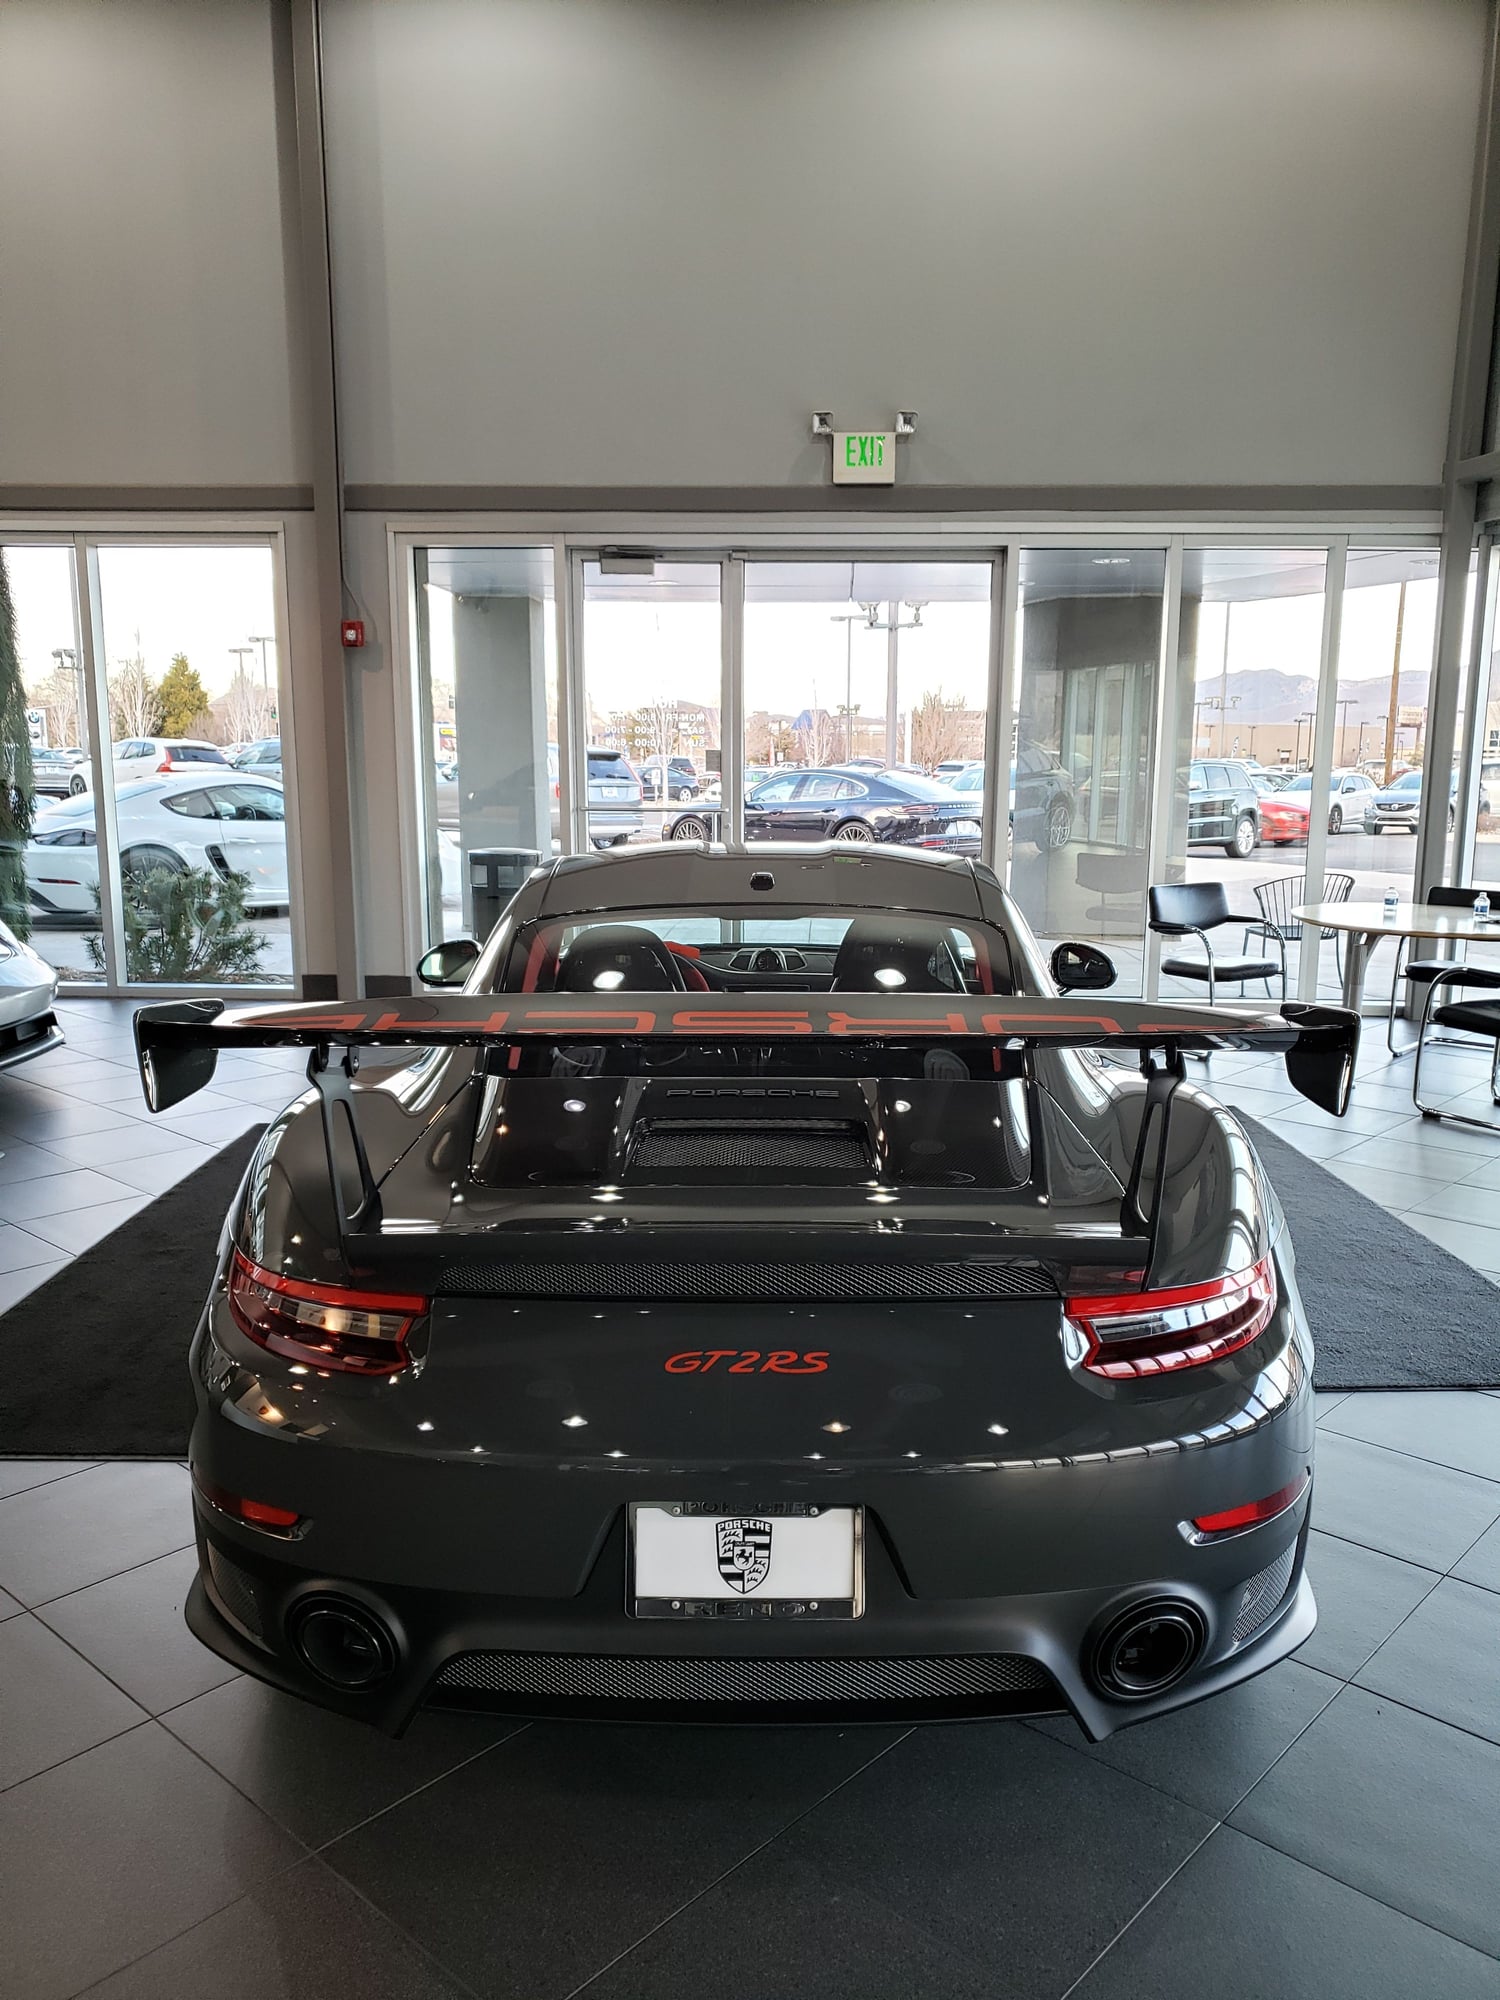 2018 Porsche 911 - 2018 Porsche GT2RS Weissach PTS - Slate Grey - Used - VIN WP0AE2A91JS186071 - 500 Miles - 6 cyl - 2WD - Automatic - Coupe - Gray - Reno, NV 89511, United States